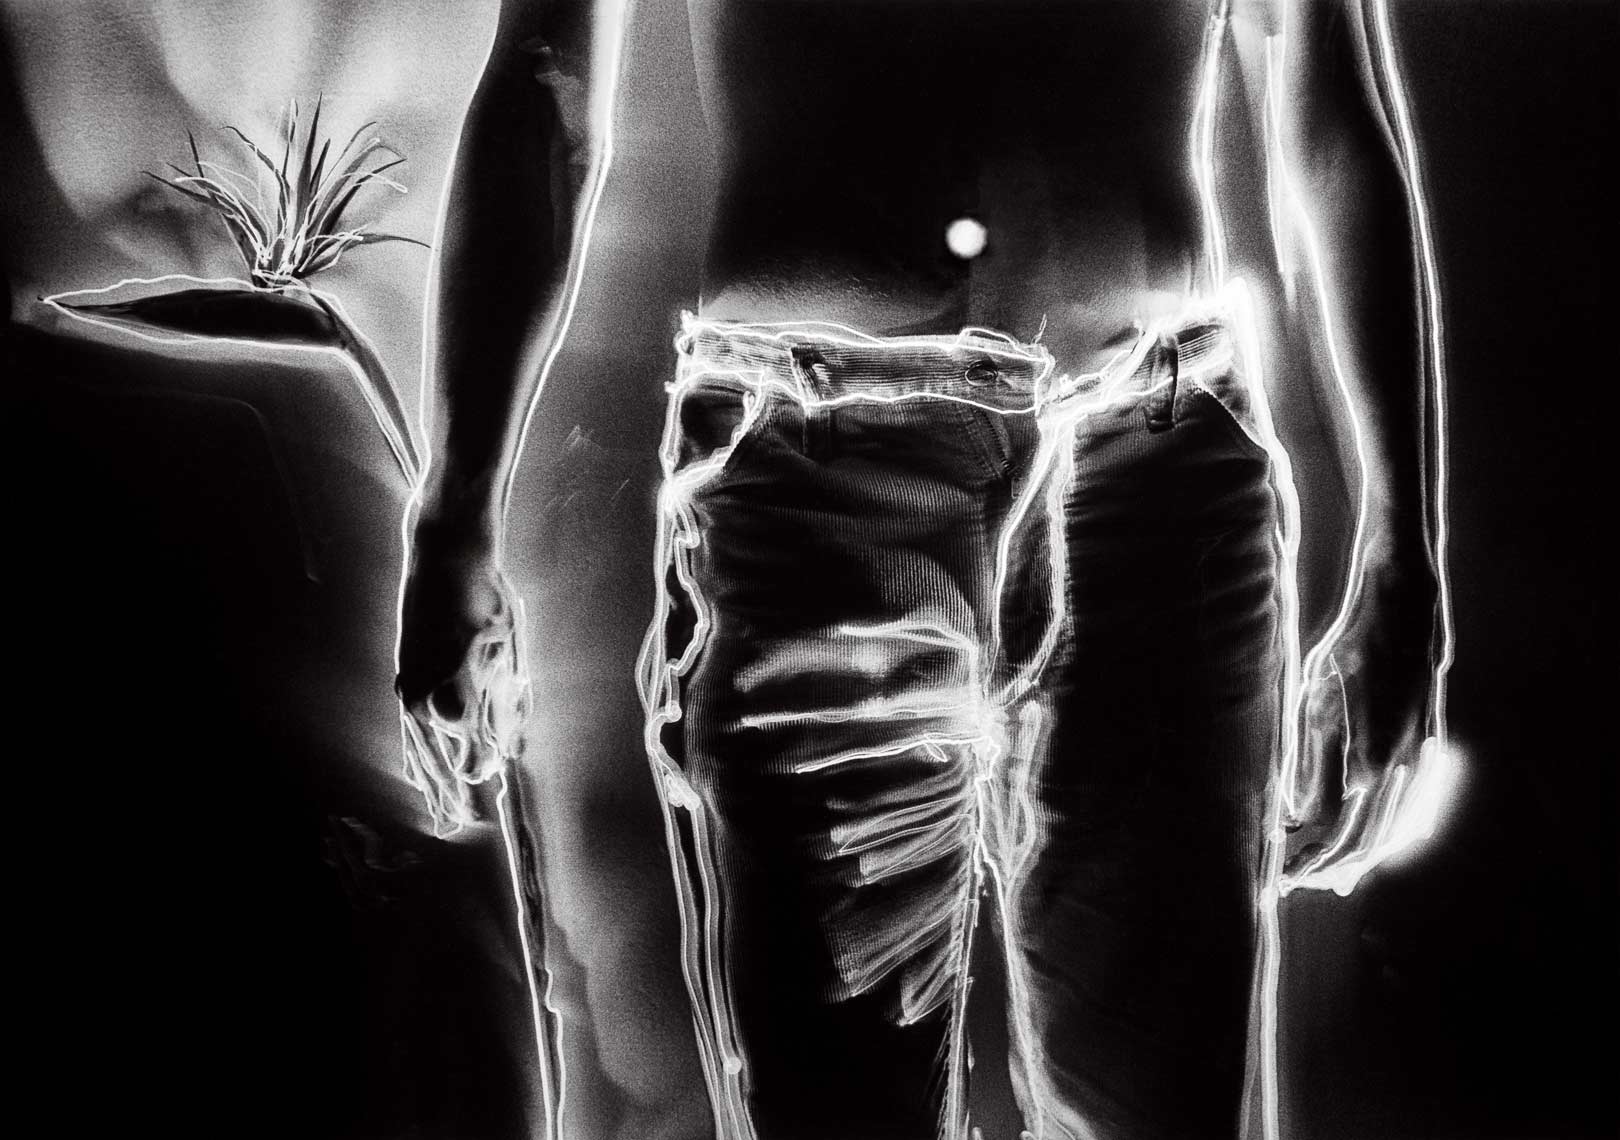 David Lebe; Bird of Paradise, 1981, male nude, light drawing, black and white photograph